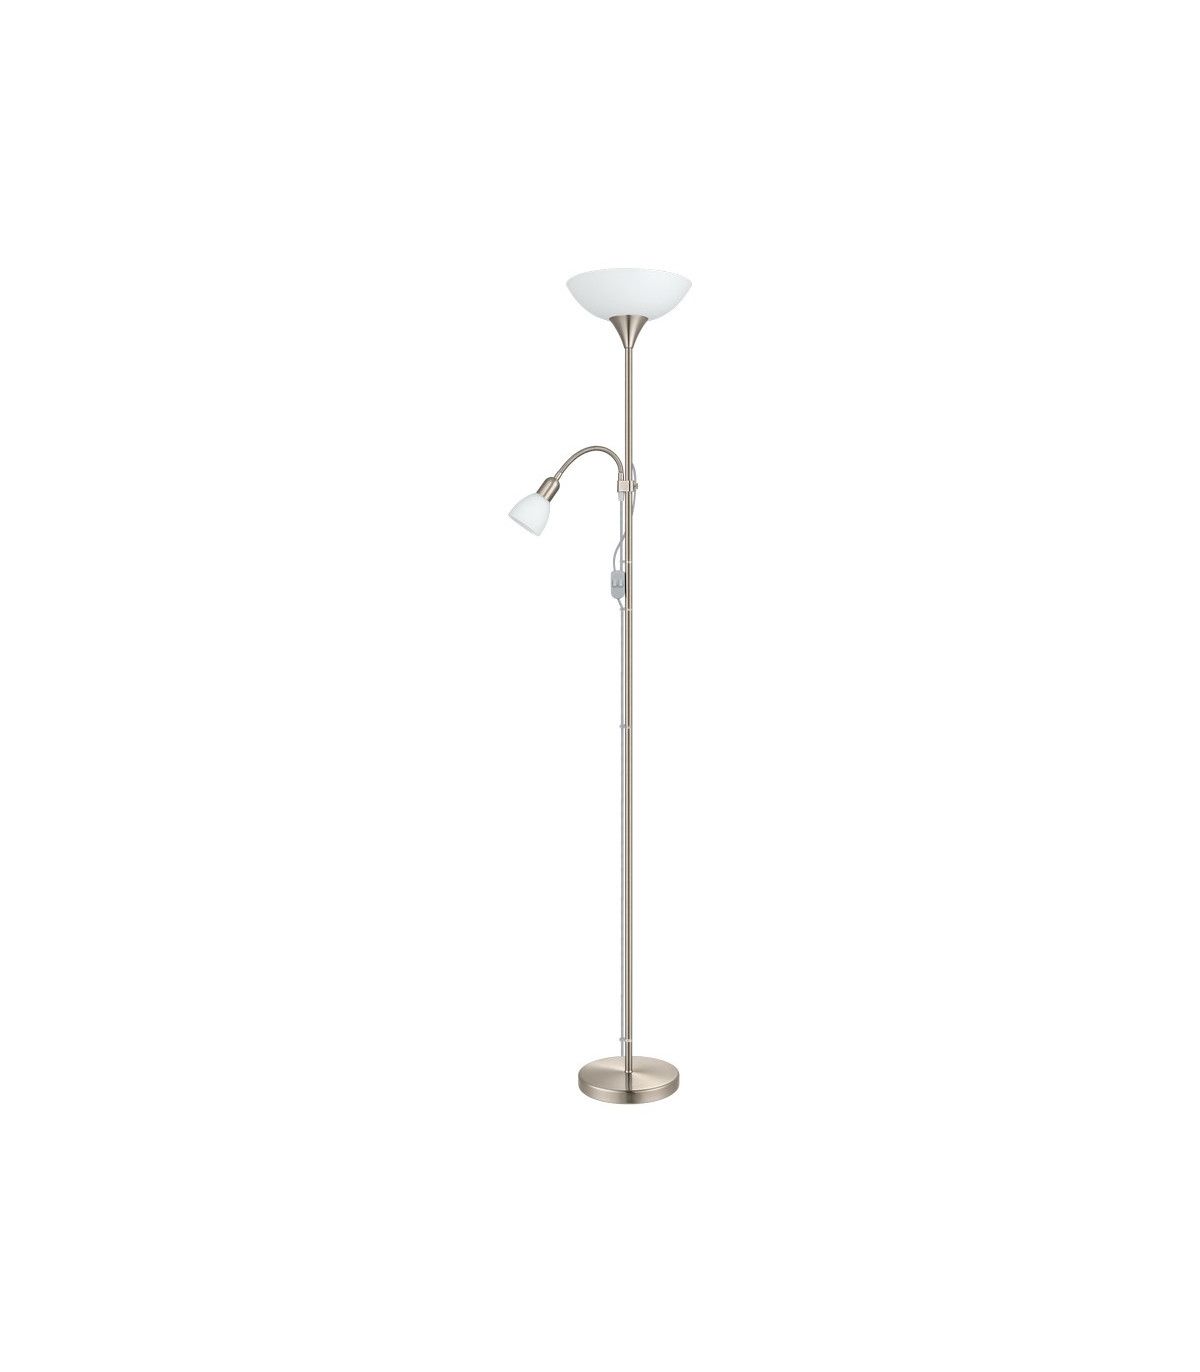 Up 2 Light Traditional Adjustable Floor Lamp Satin Nickel And White Frosted  Glass With Switch | Netlighting.co (View 15 of 20)